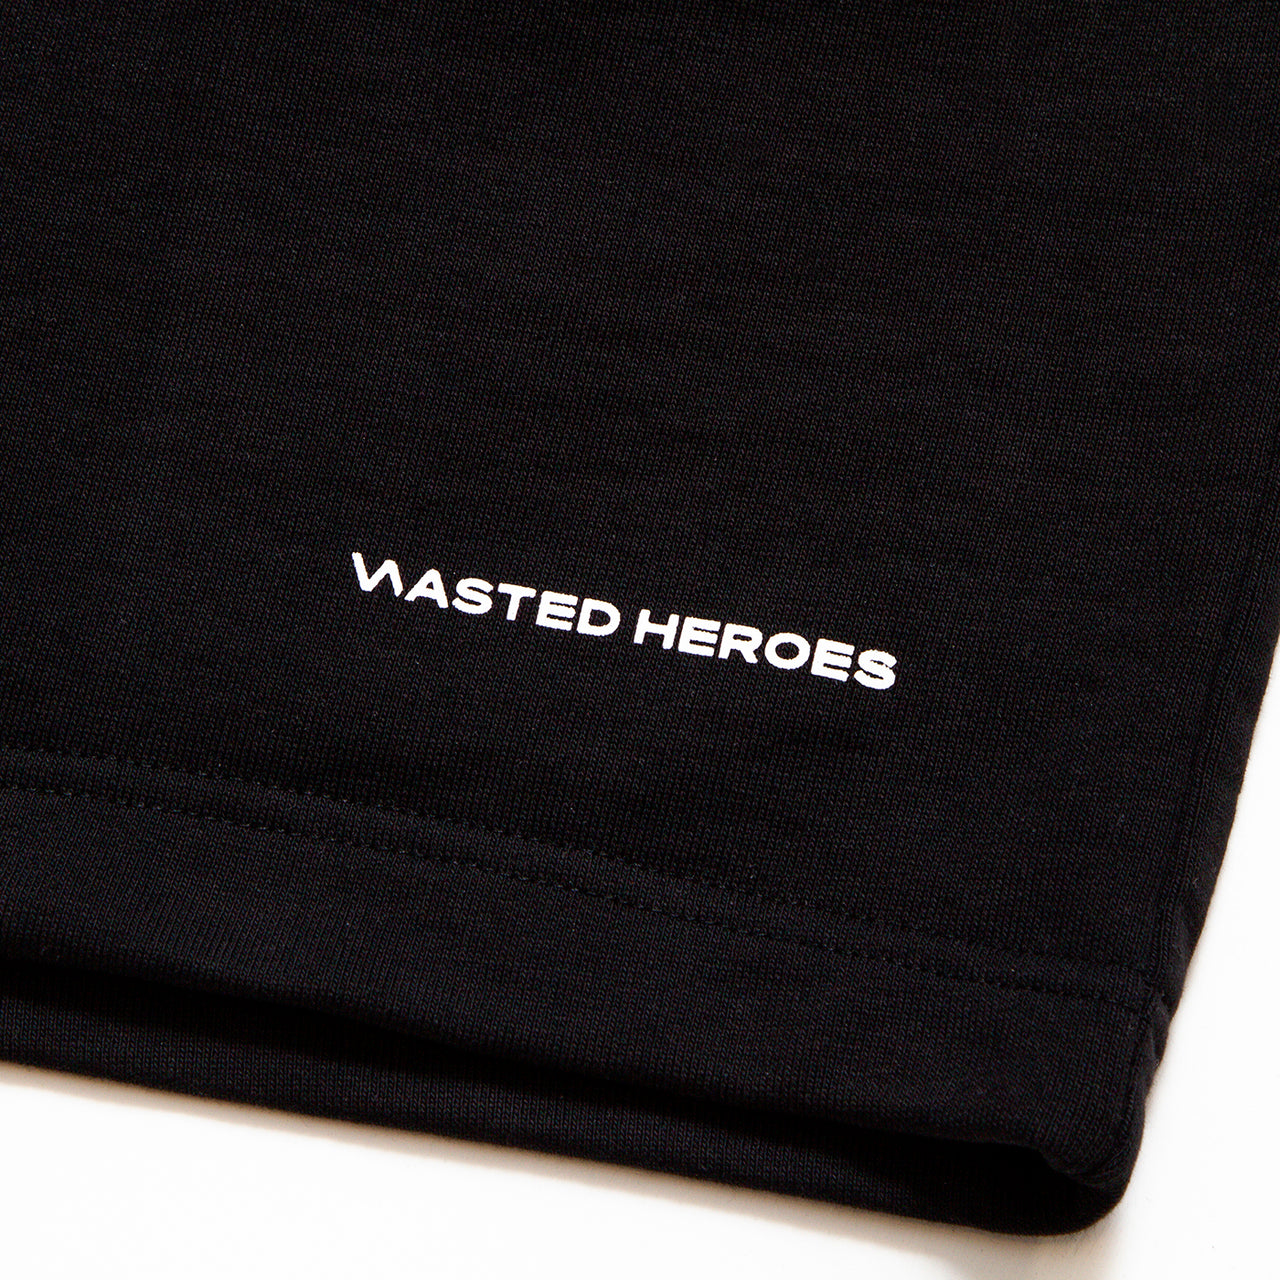 Wasted Heroes - Jersey Shorts - Black